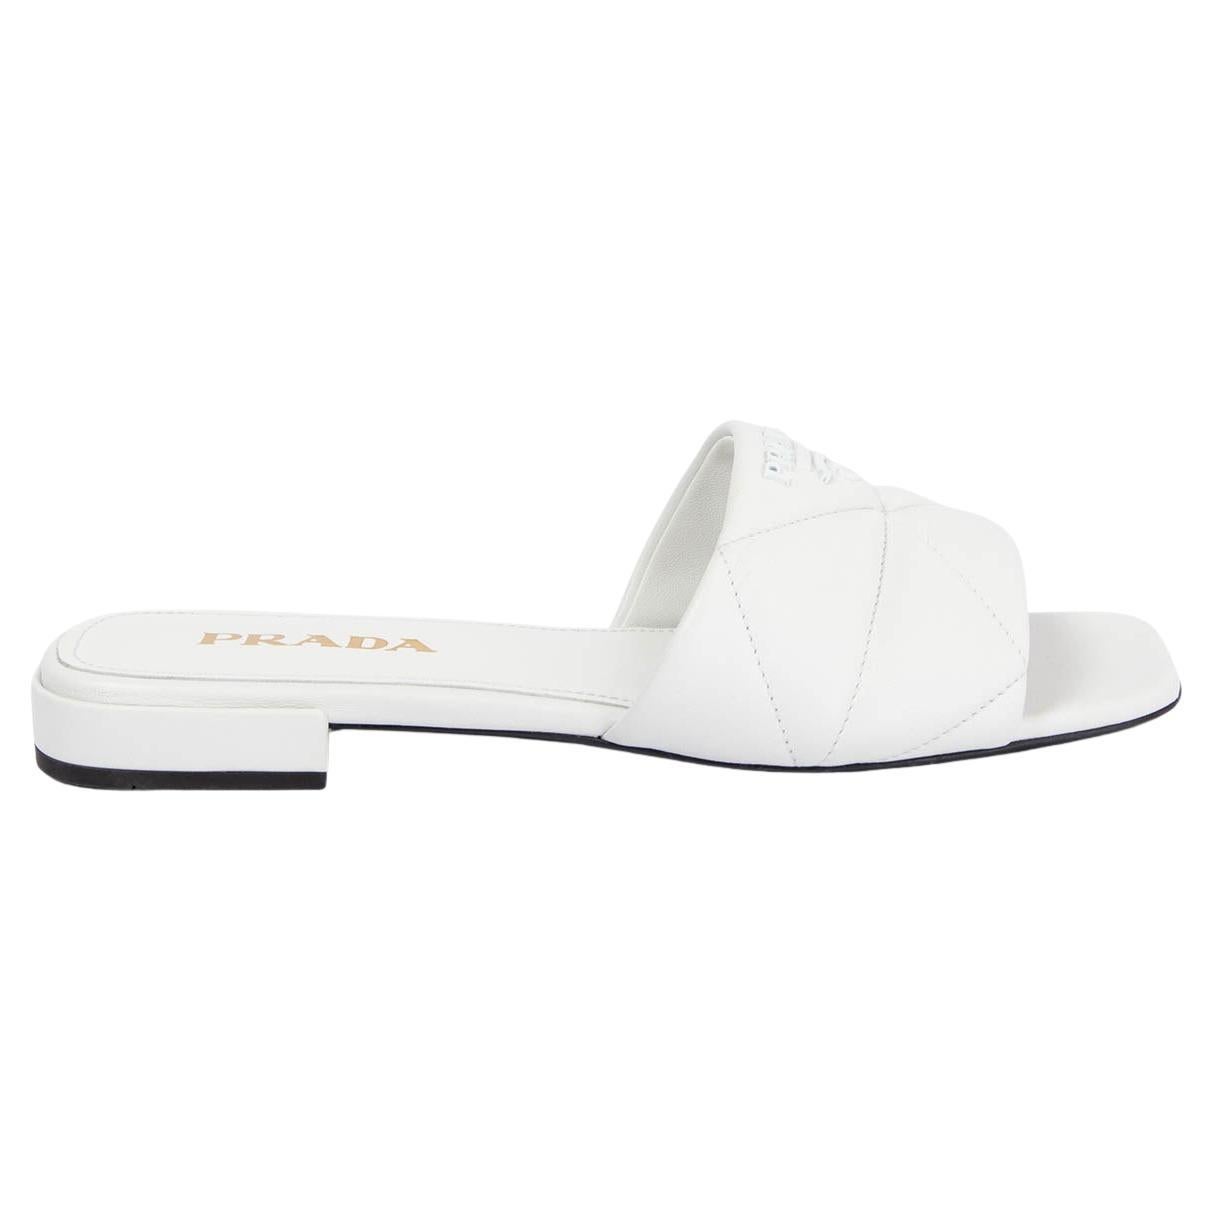 PRADA white leather QUILTED SABOTS Slide Shoes 39.5